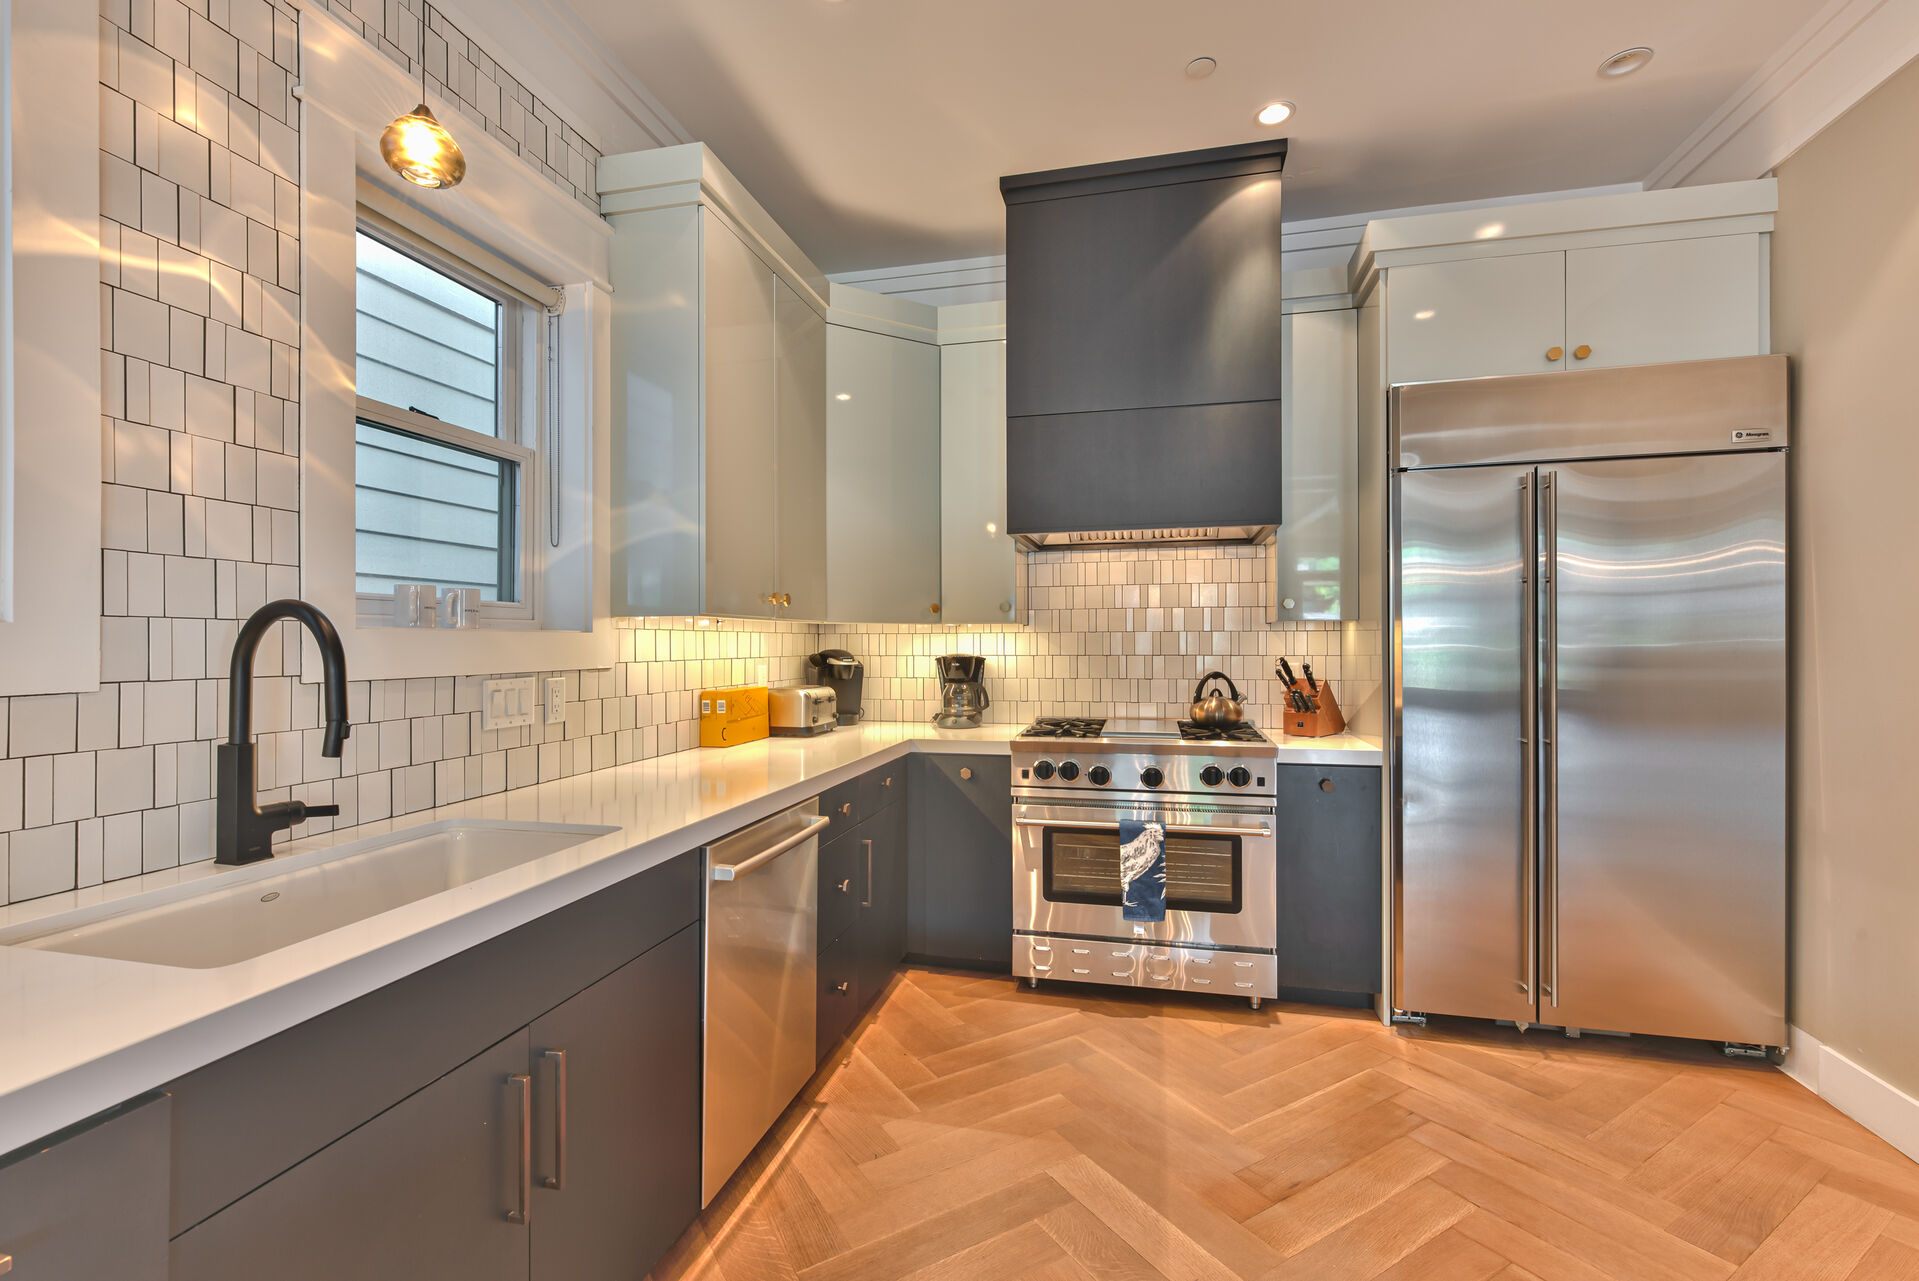 Stainless Steel Appliances, Including a 4-burner Gas Range with a Griddle and a Wine Fridge